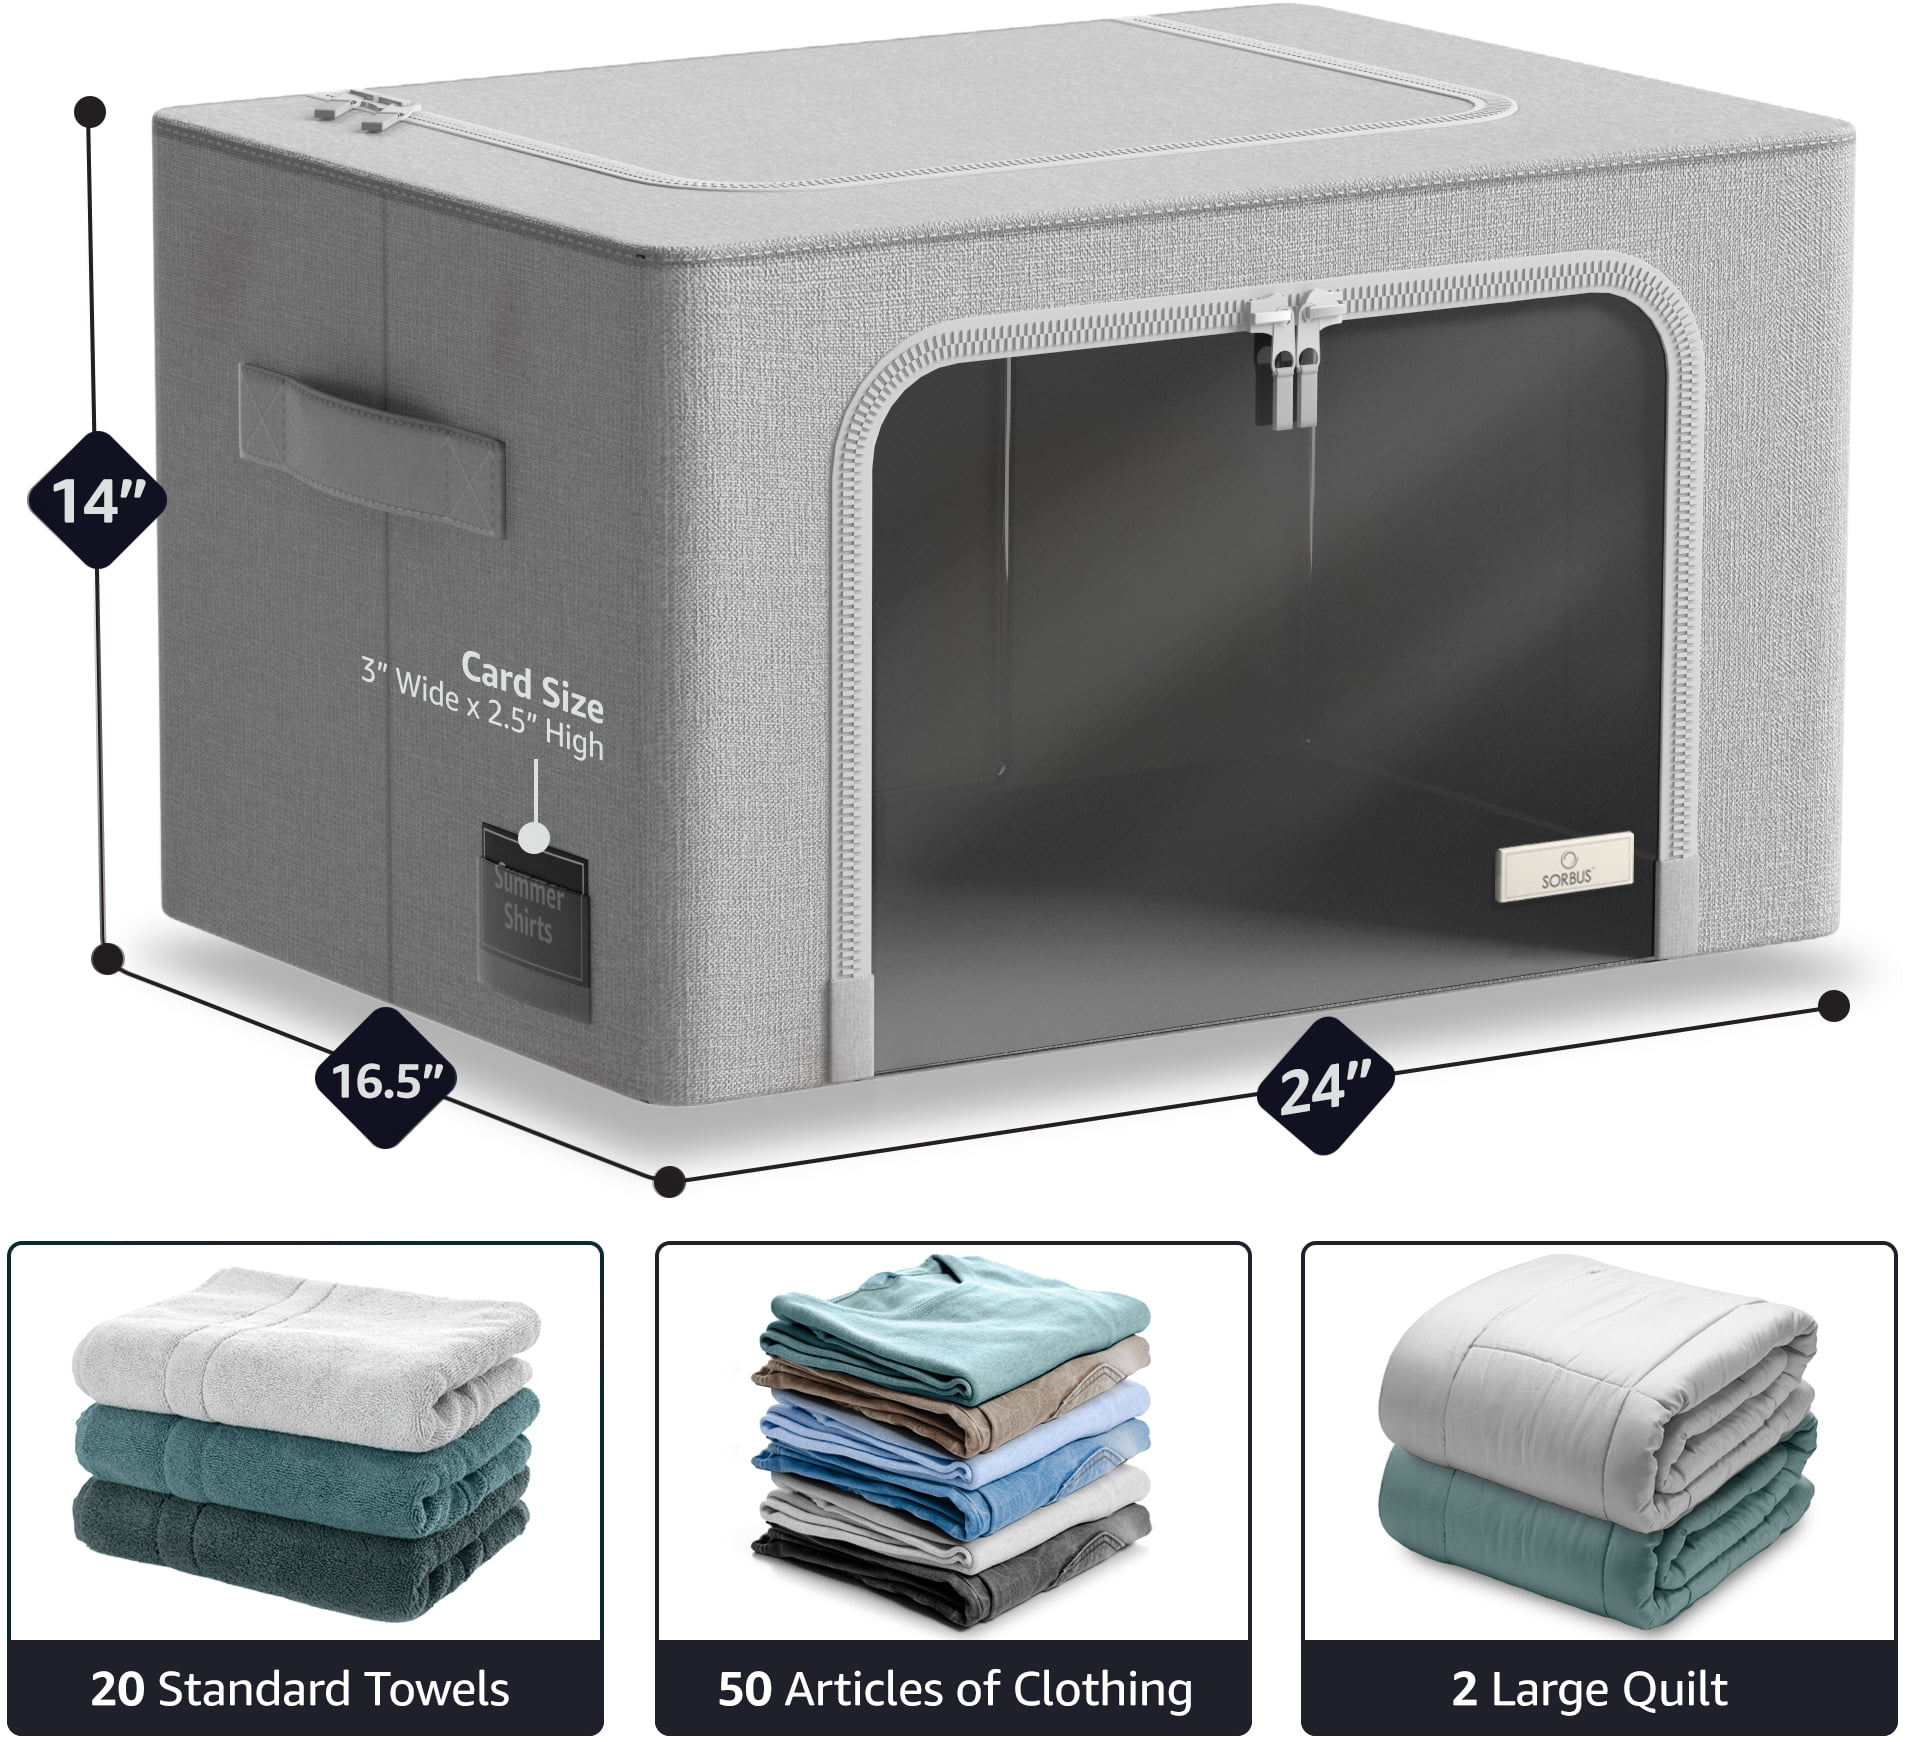 Blanket Storage Container Fabric Storage Closet Storage Shelf Material: Coherer Durable The Bathroom The Man Flat Storage Bins with Lids Under Bed